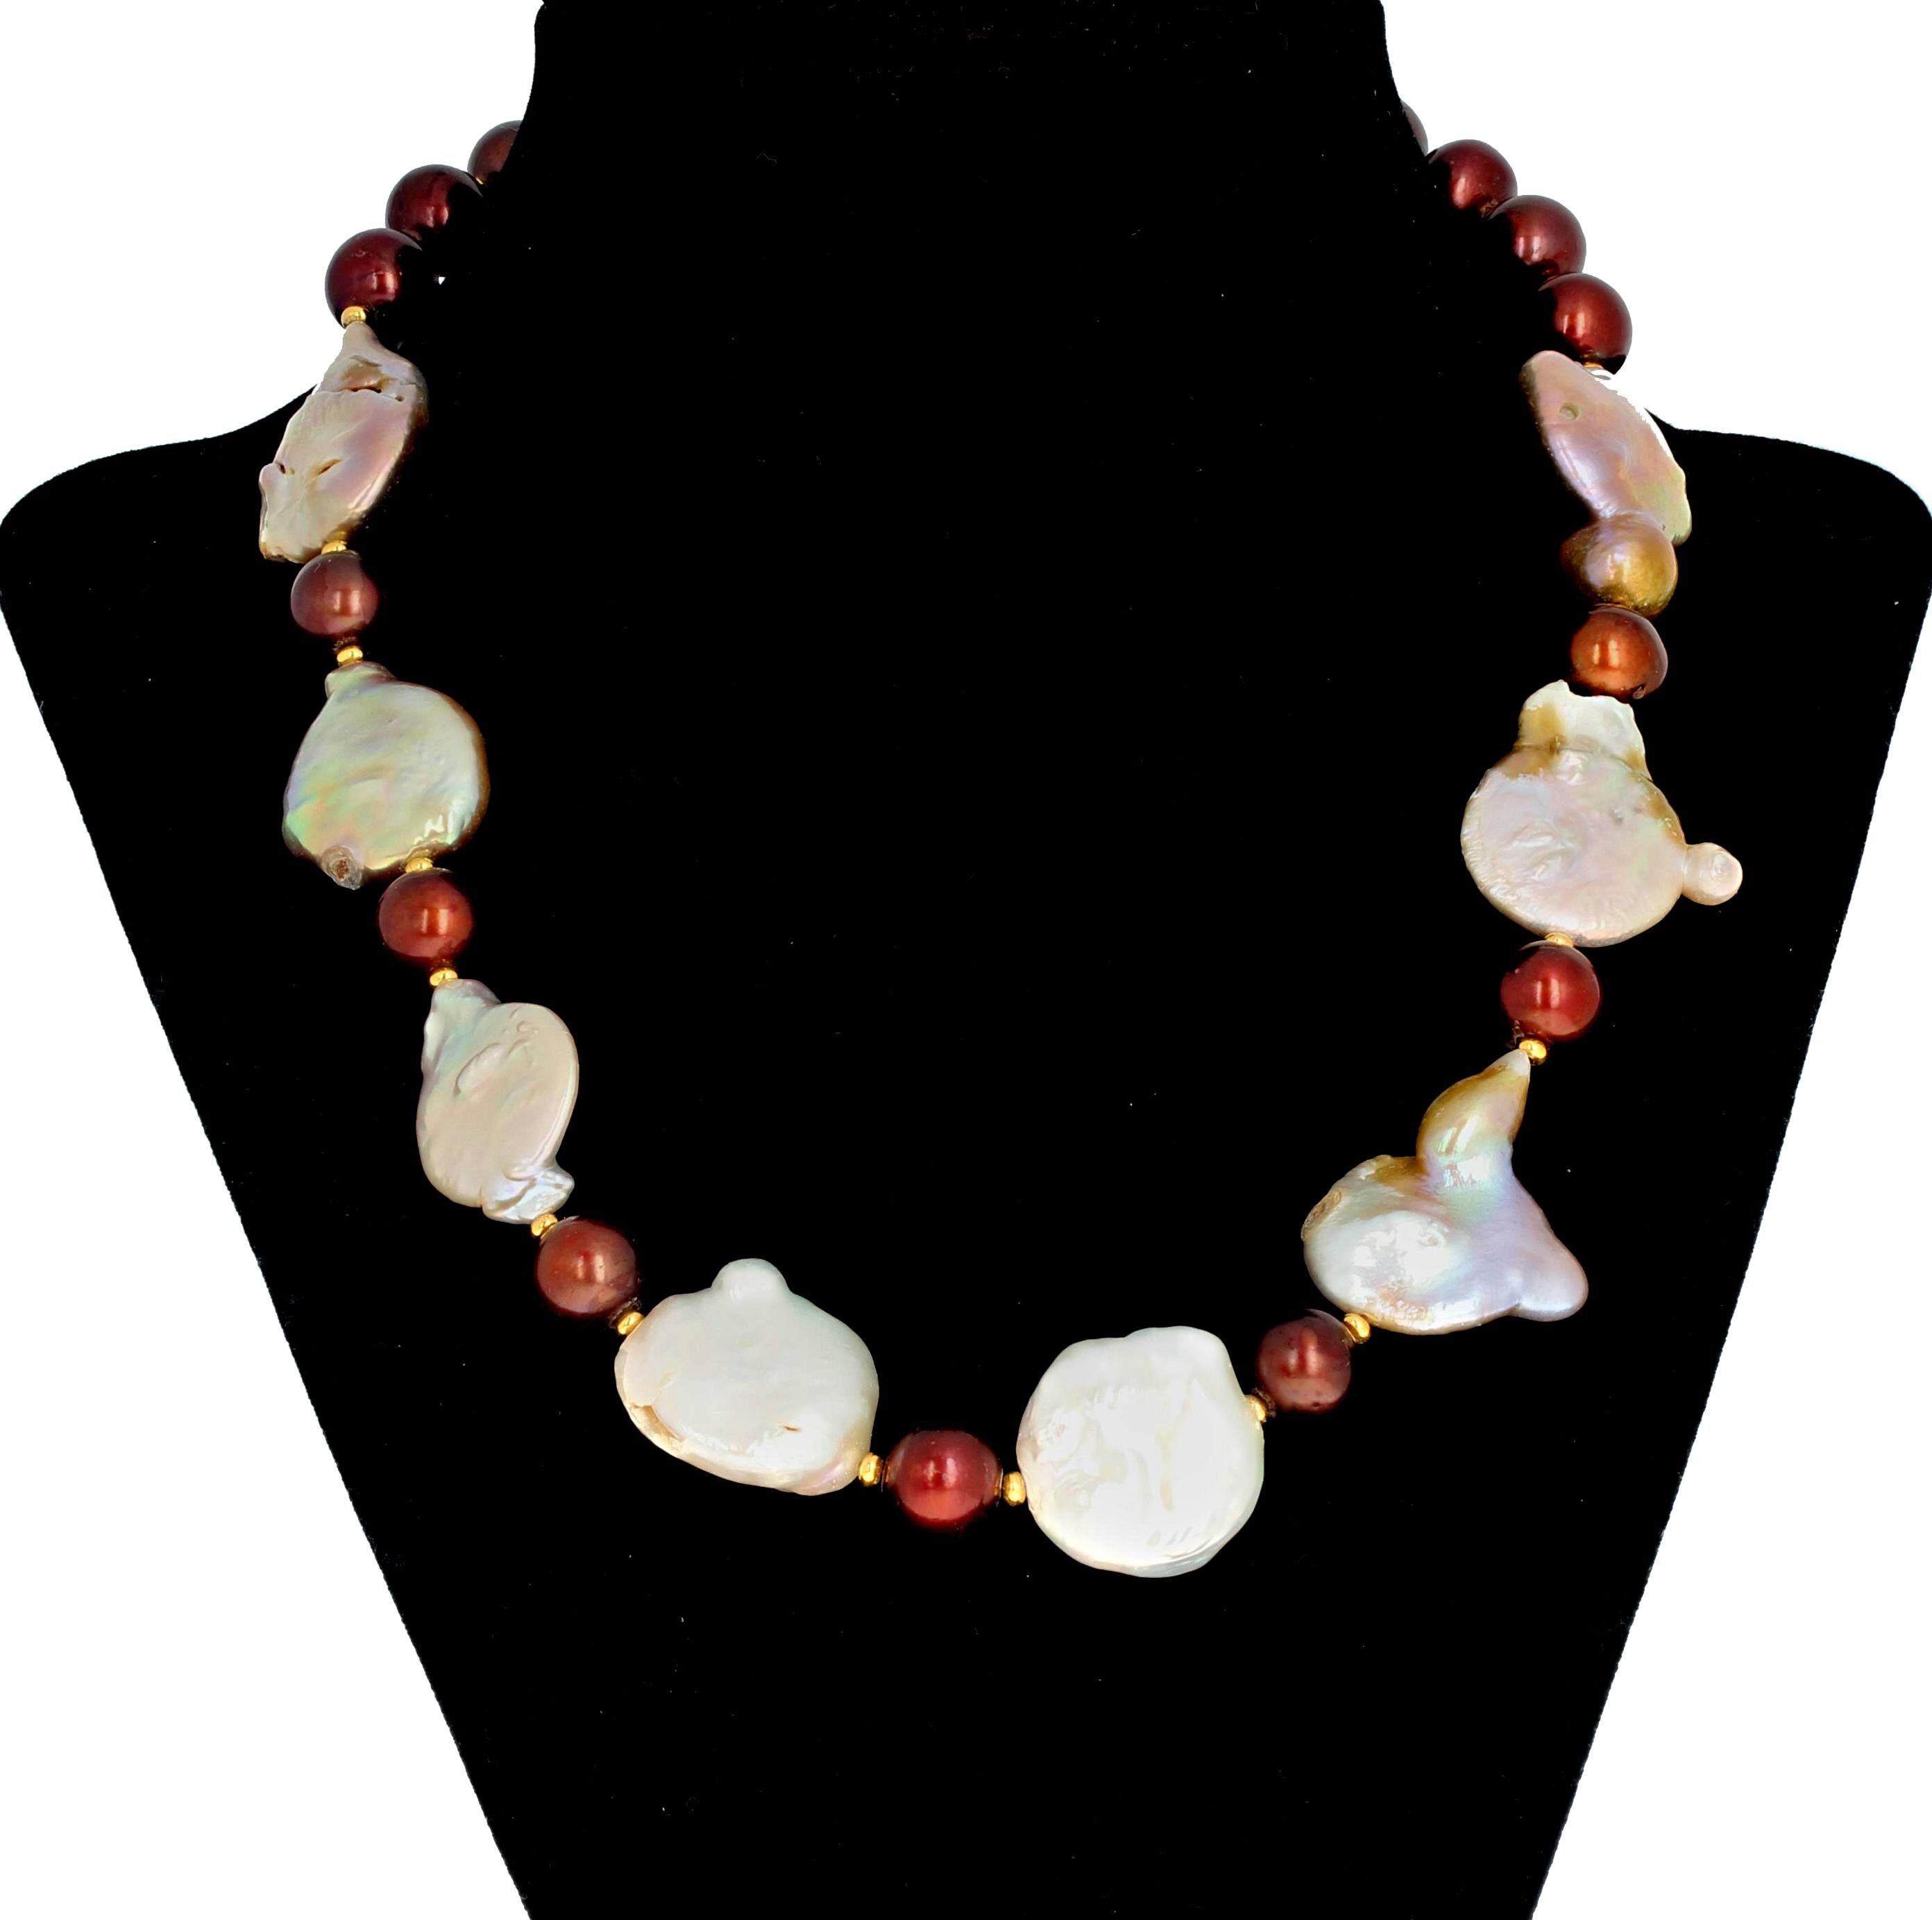 Wonderful lumpy bumpy shaped odd sized real dramatic natural cultured Coin Pearls are enhanced with round coppery color cultured Pearls in this 18 inch long handmade necklace.  The Coin Pearls are approximately 20 mm and the round Pearls are